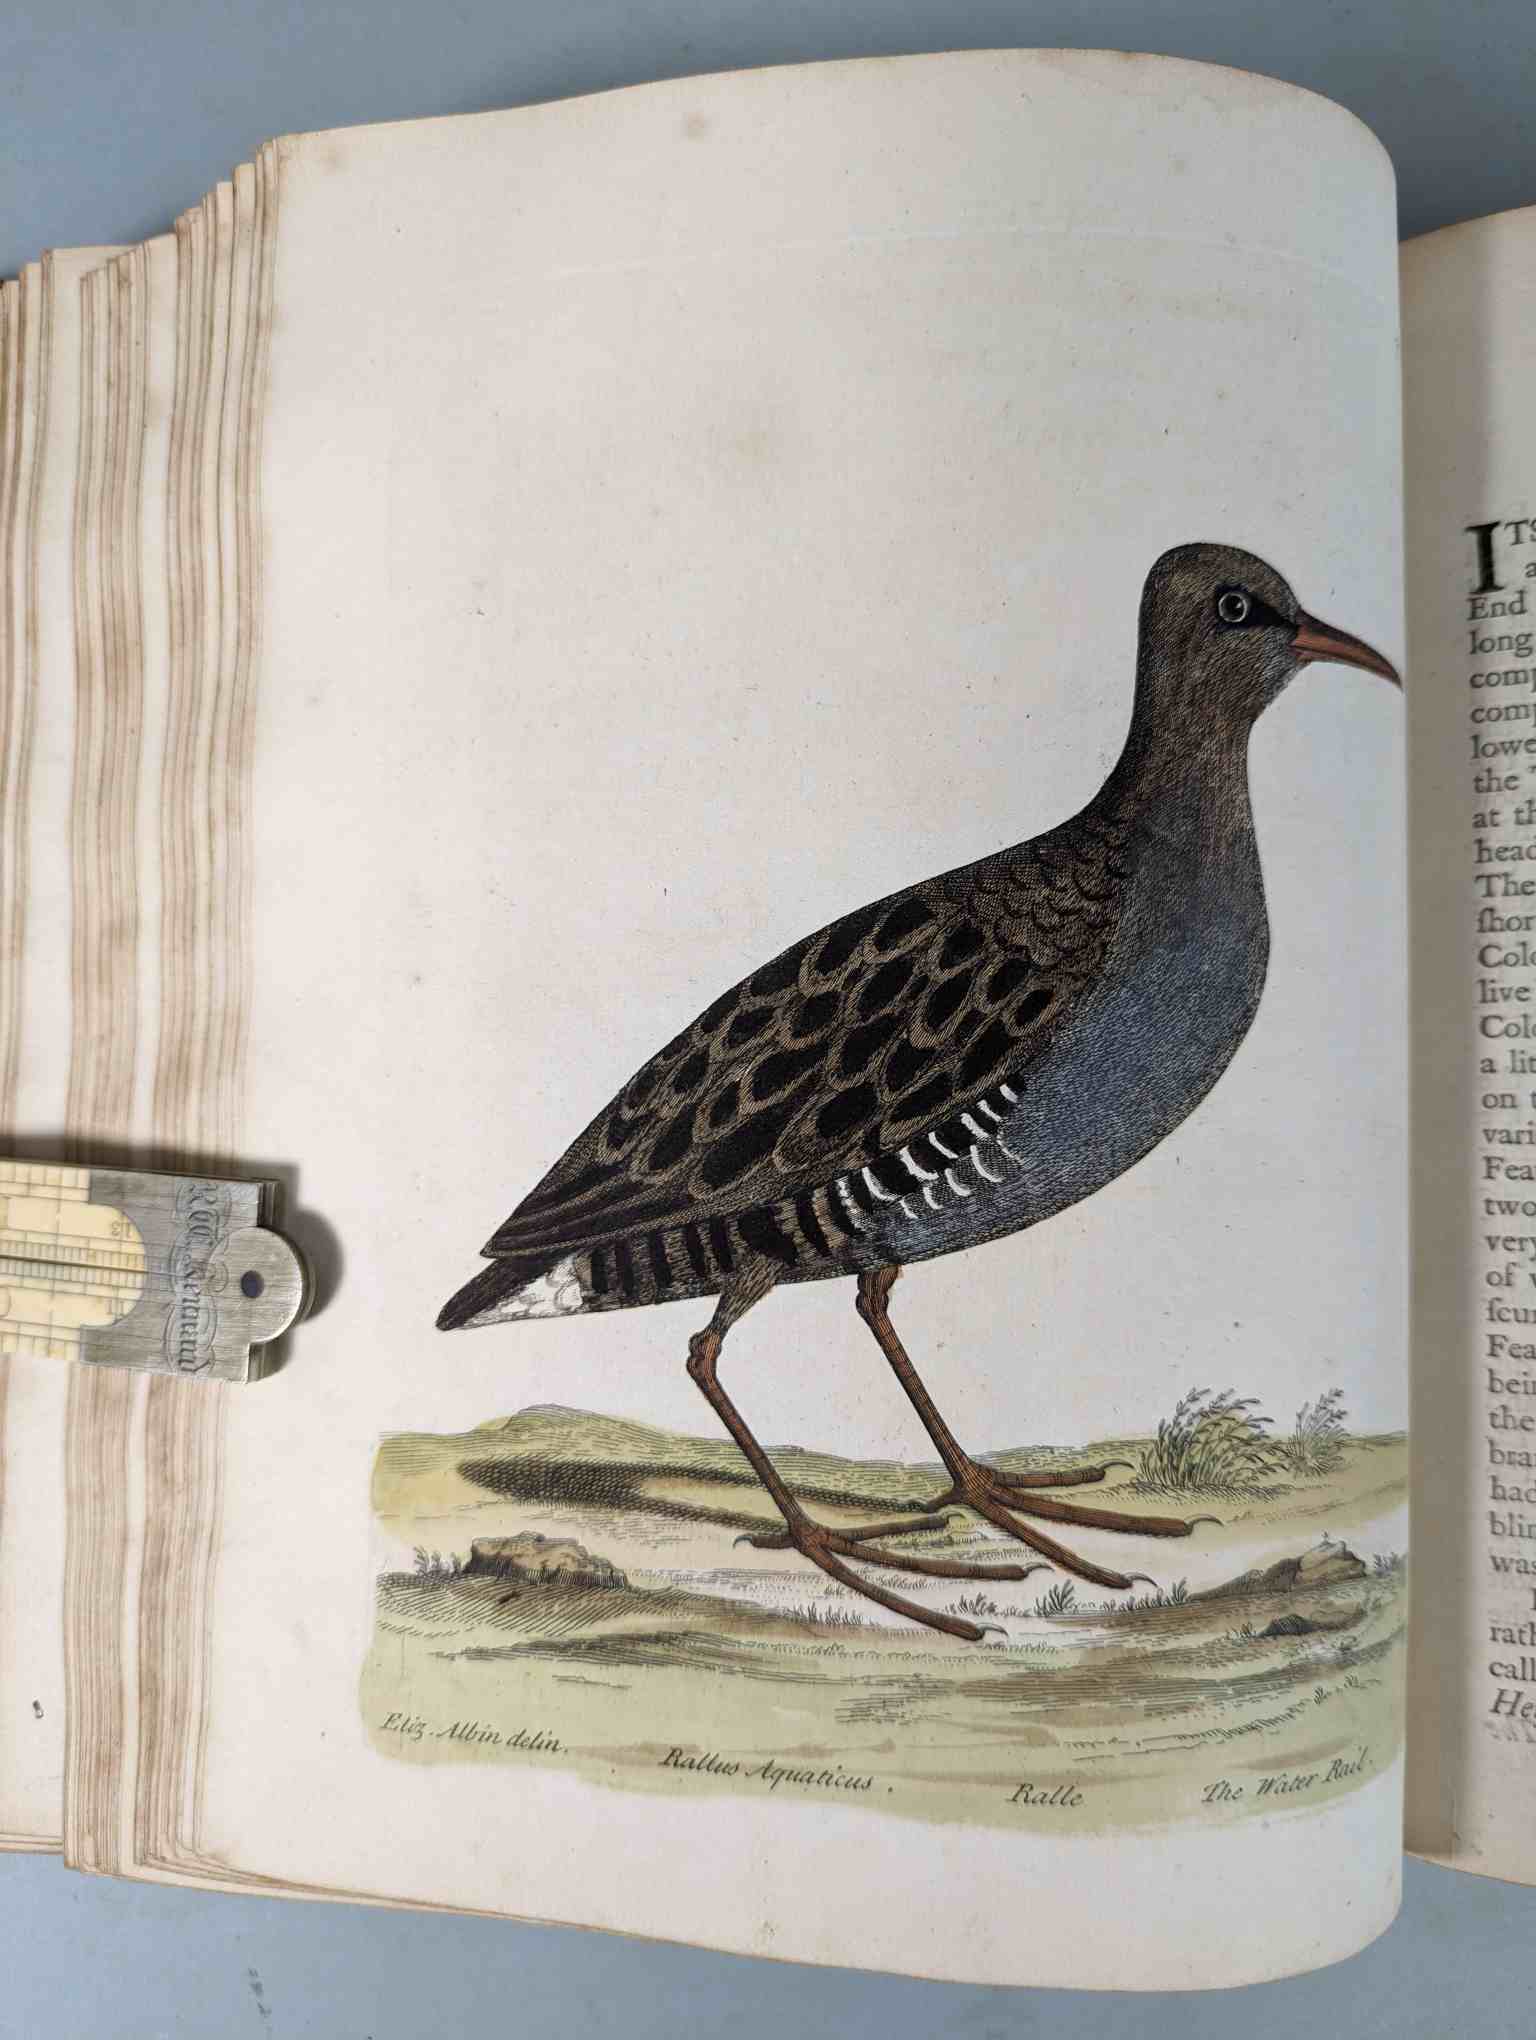 ALBIN, Eleazar. A Natural History of Birds, to which are added, Notes and Observations by W. - Image 80 of 208